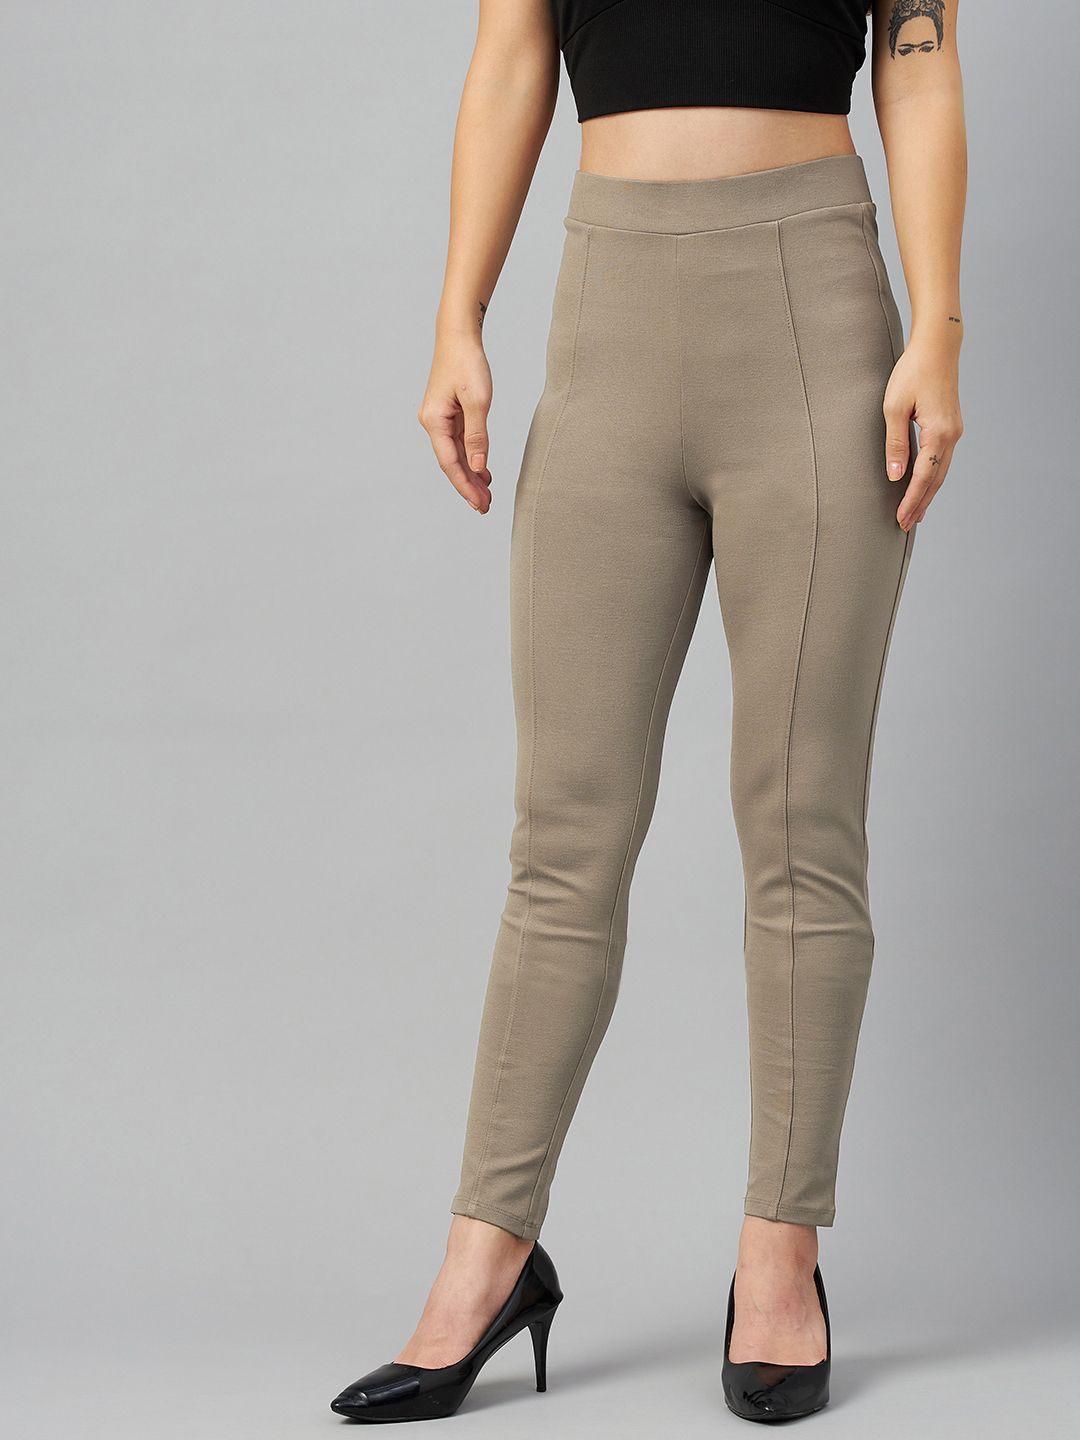 marks-&-spencer-women-taupe-high-rise-solid-treggings